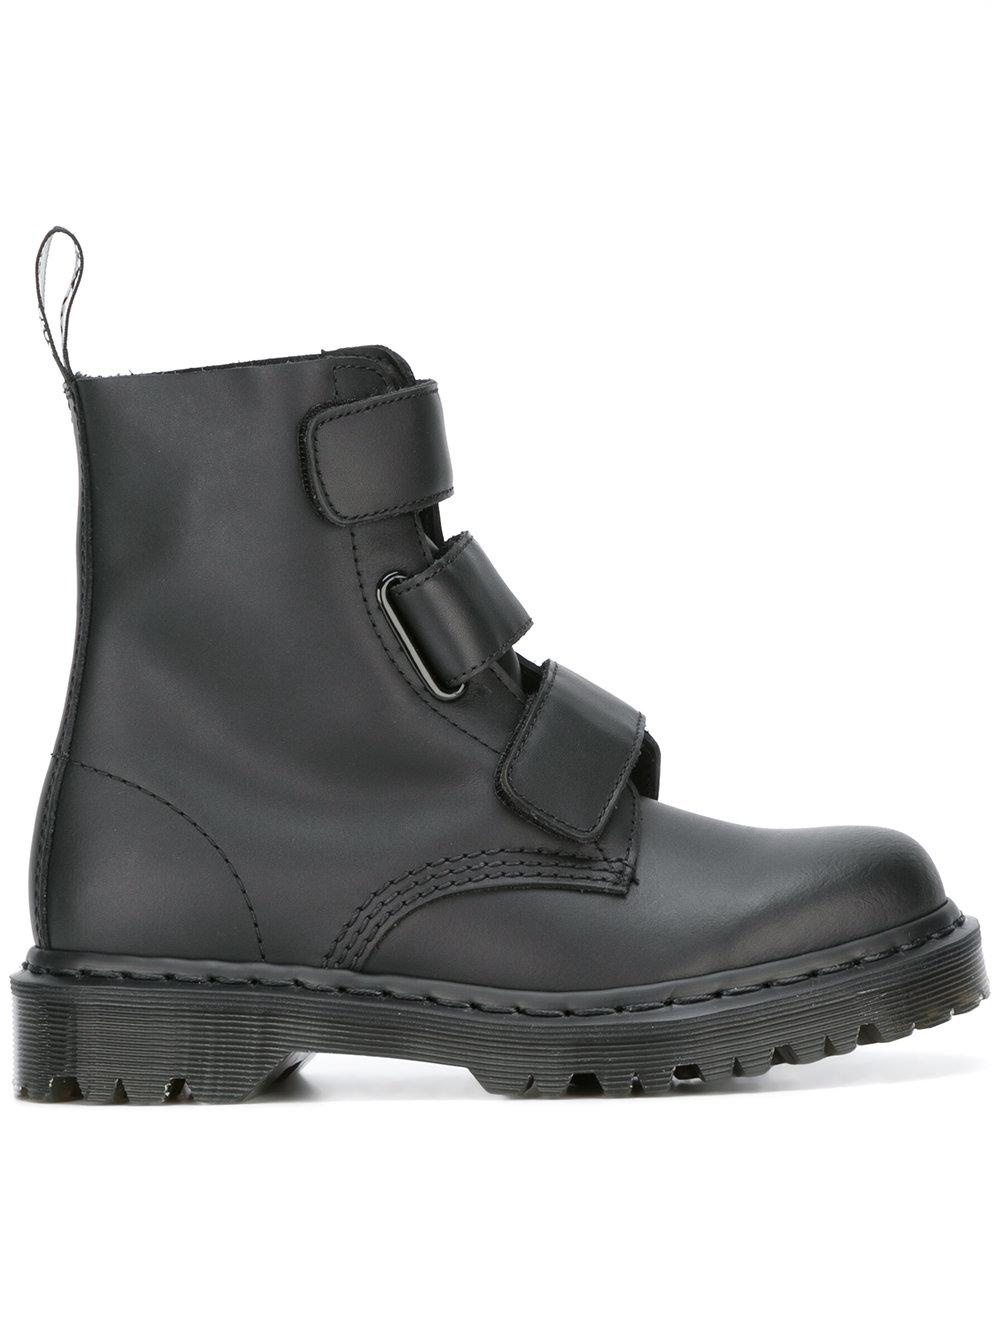 Dr. Martens Leather Coralia Boots in Black | Lyst